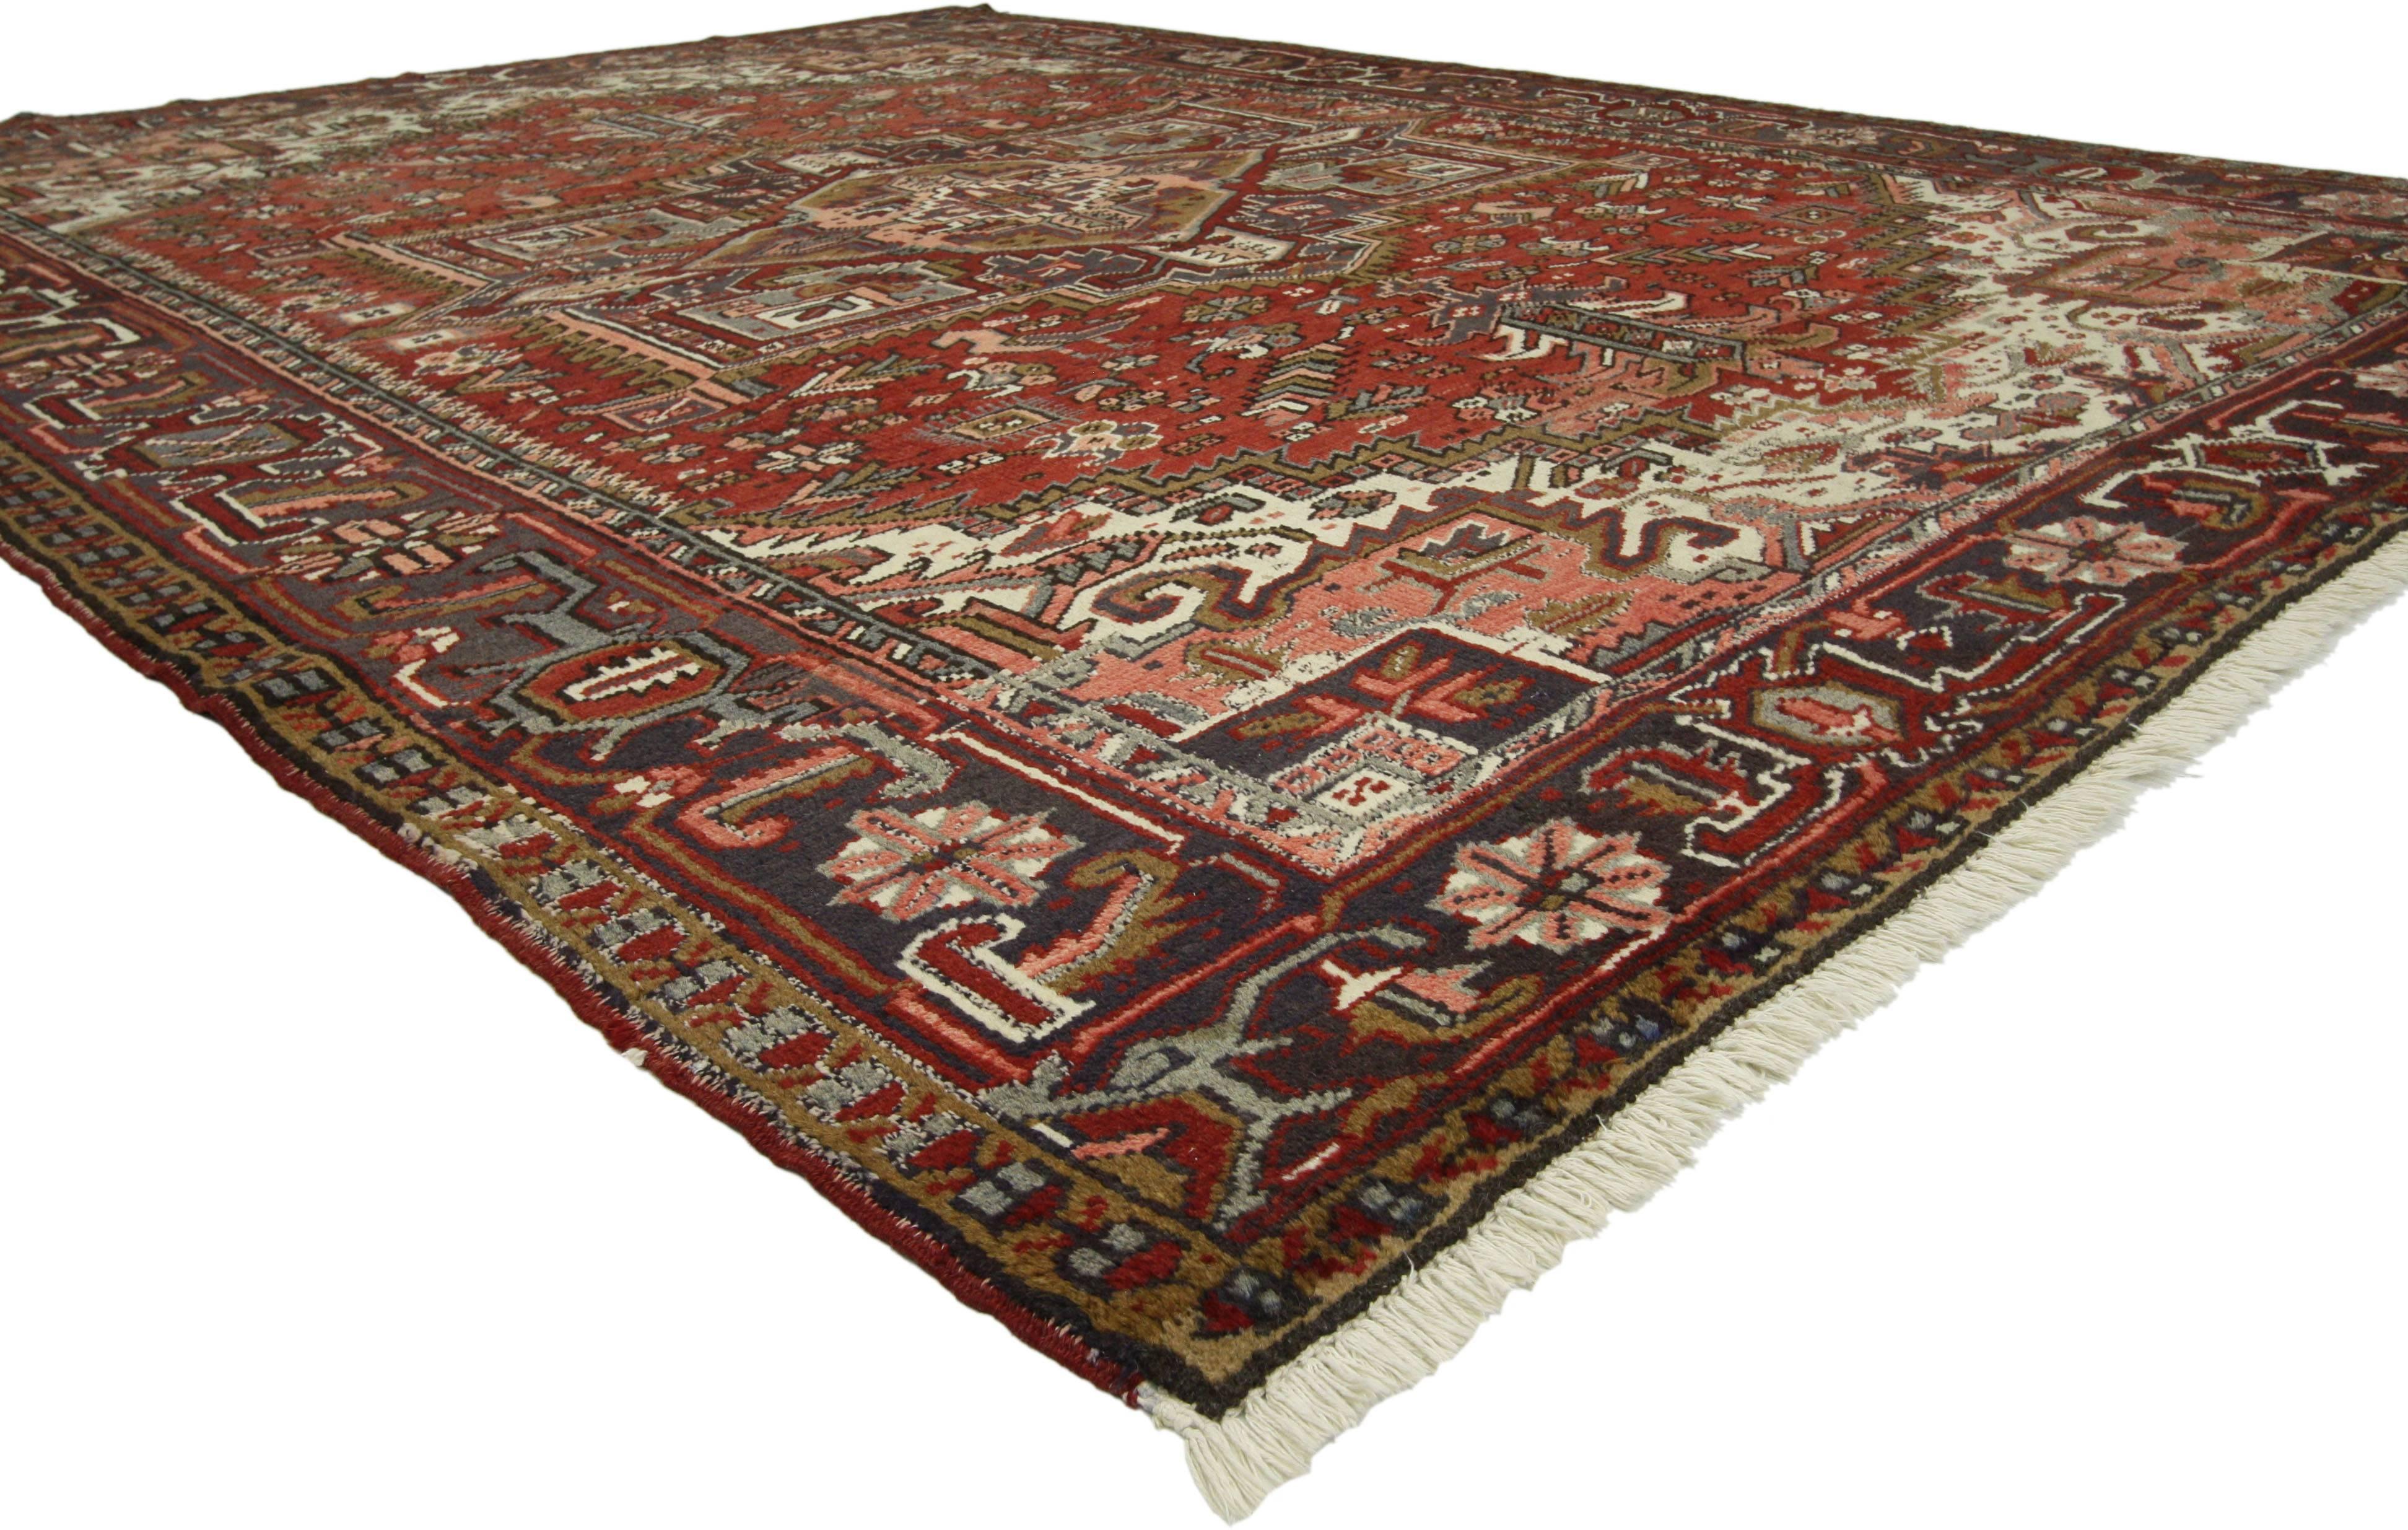 75334 Vintage Persian Heriz Rug with Modern Downton Abbey Style 07'05 x 10'04.  With timeless design and masculine appeal, this hand knotted wool vintage Persian Heriz rug can beautifully blend contemporary, modern, and traditional interiors. It